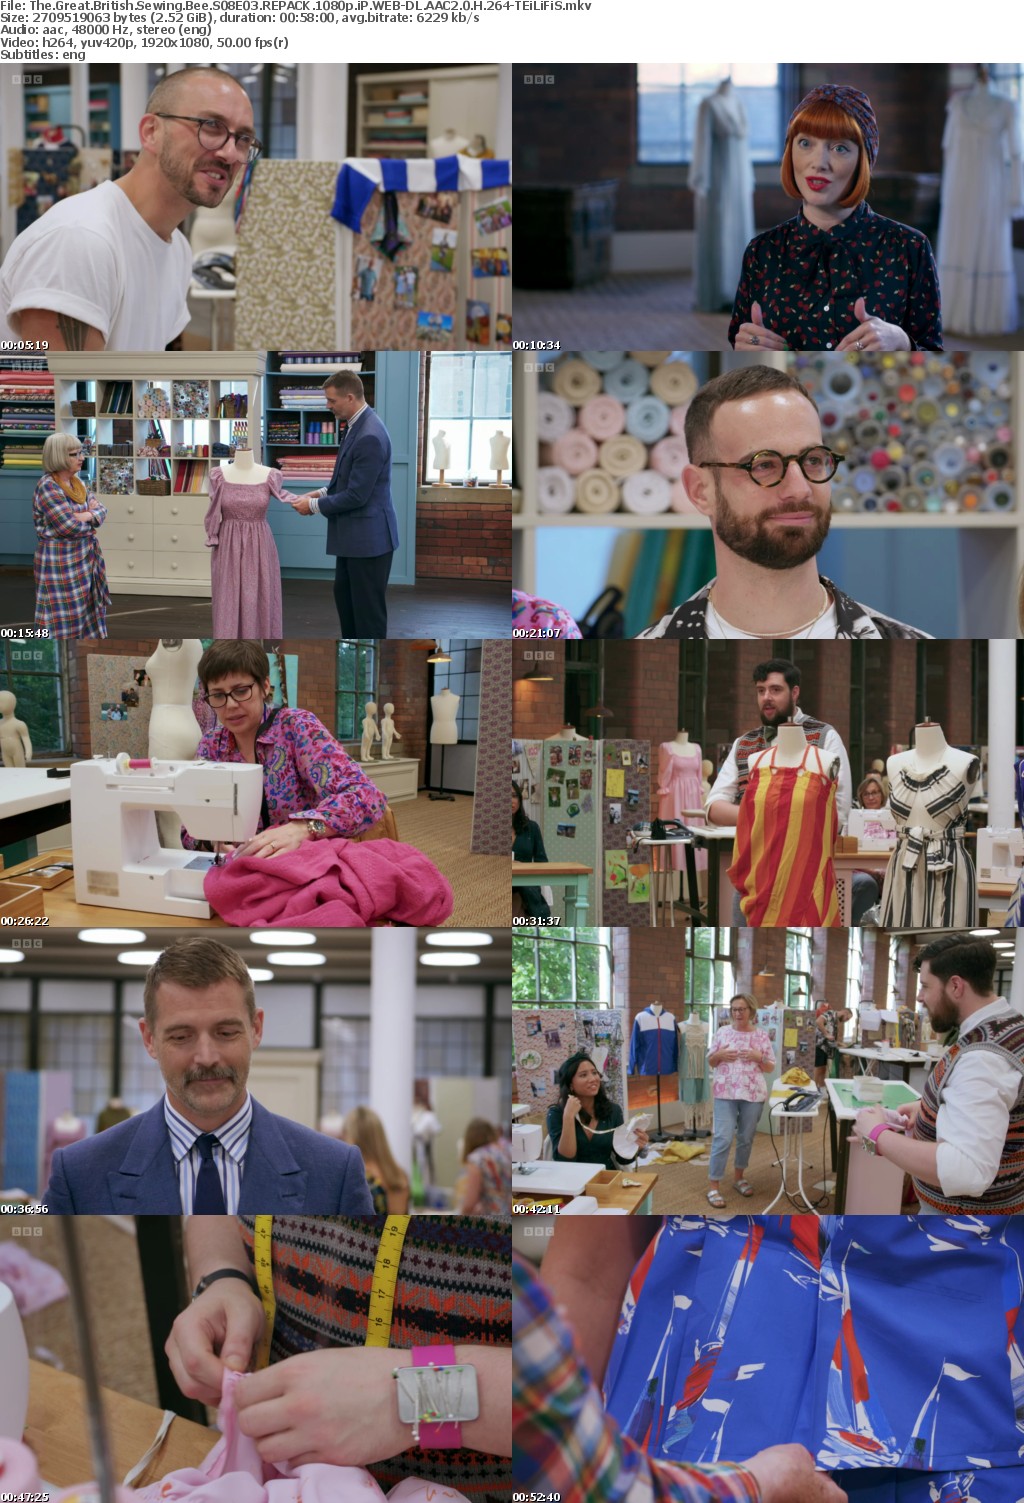 The Great British Sewing Bee S08E03 REPACK 1080p iP WEBRip AAC2 0 H264-BTN